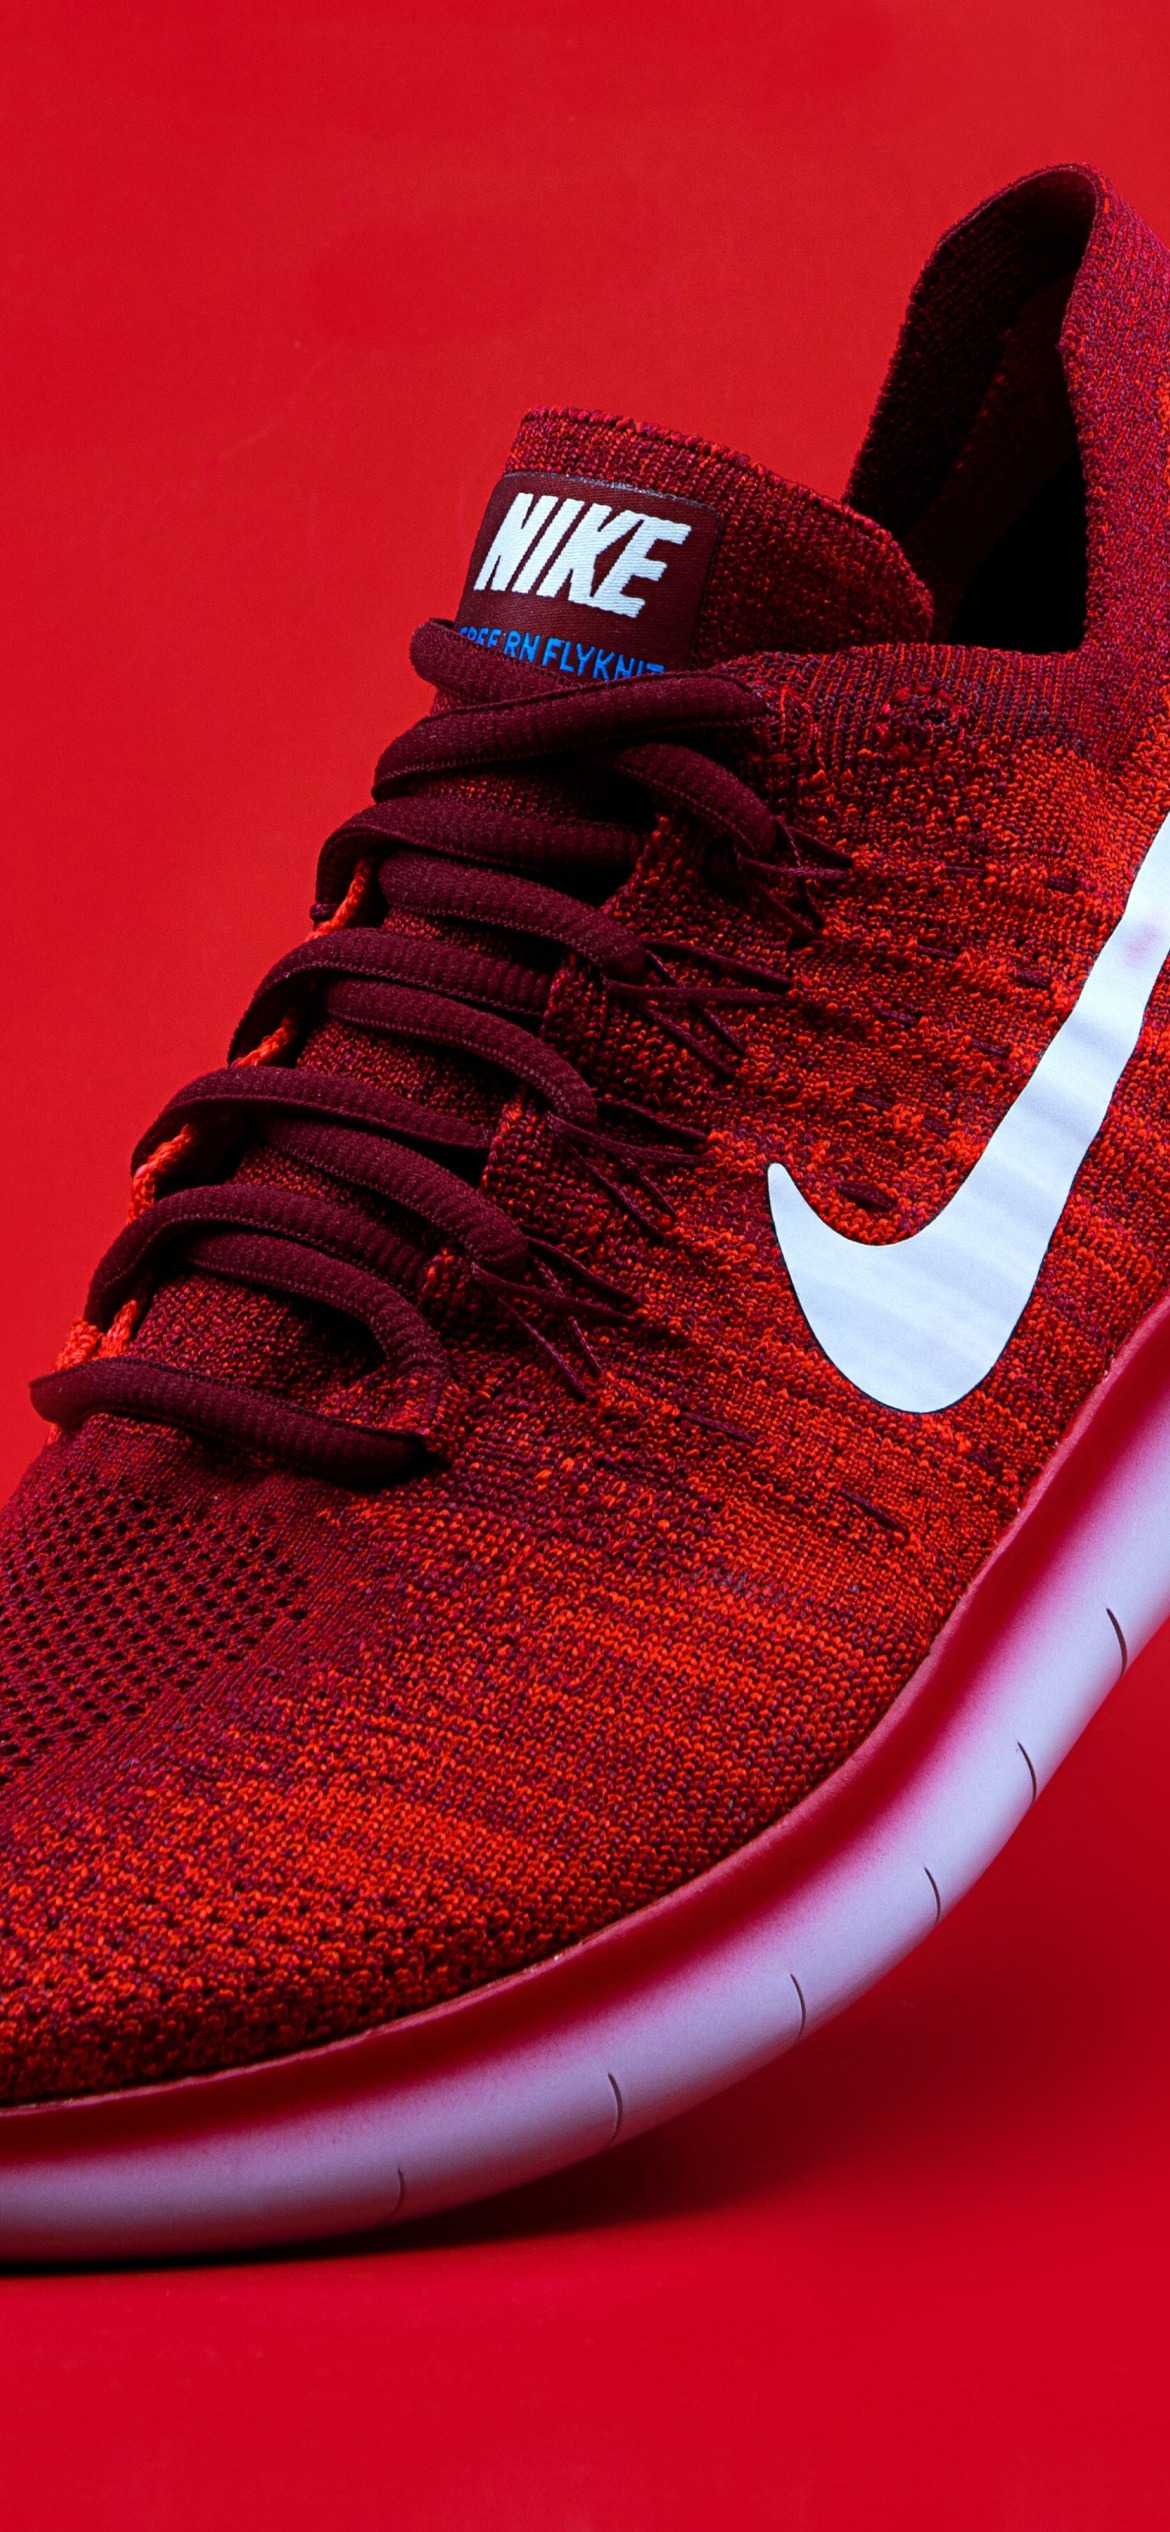 Red Nike Shoes wallpaper 1170x2532